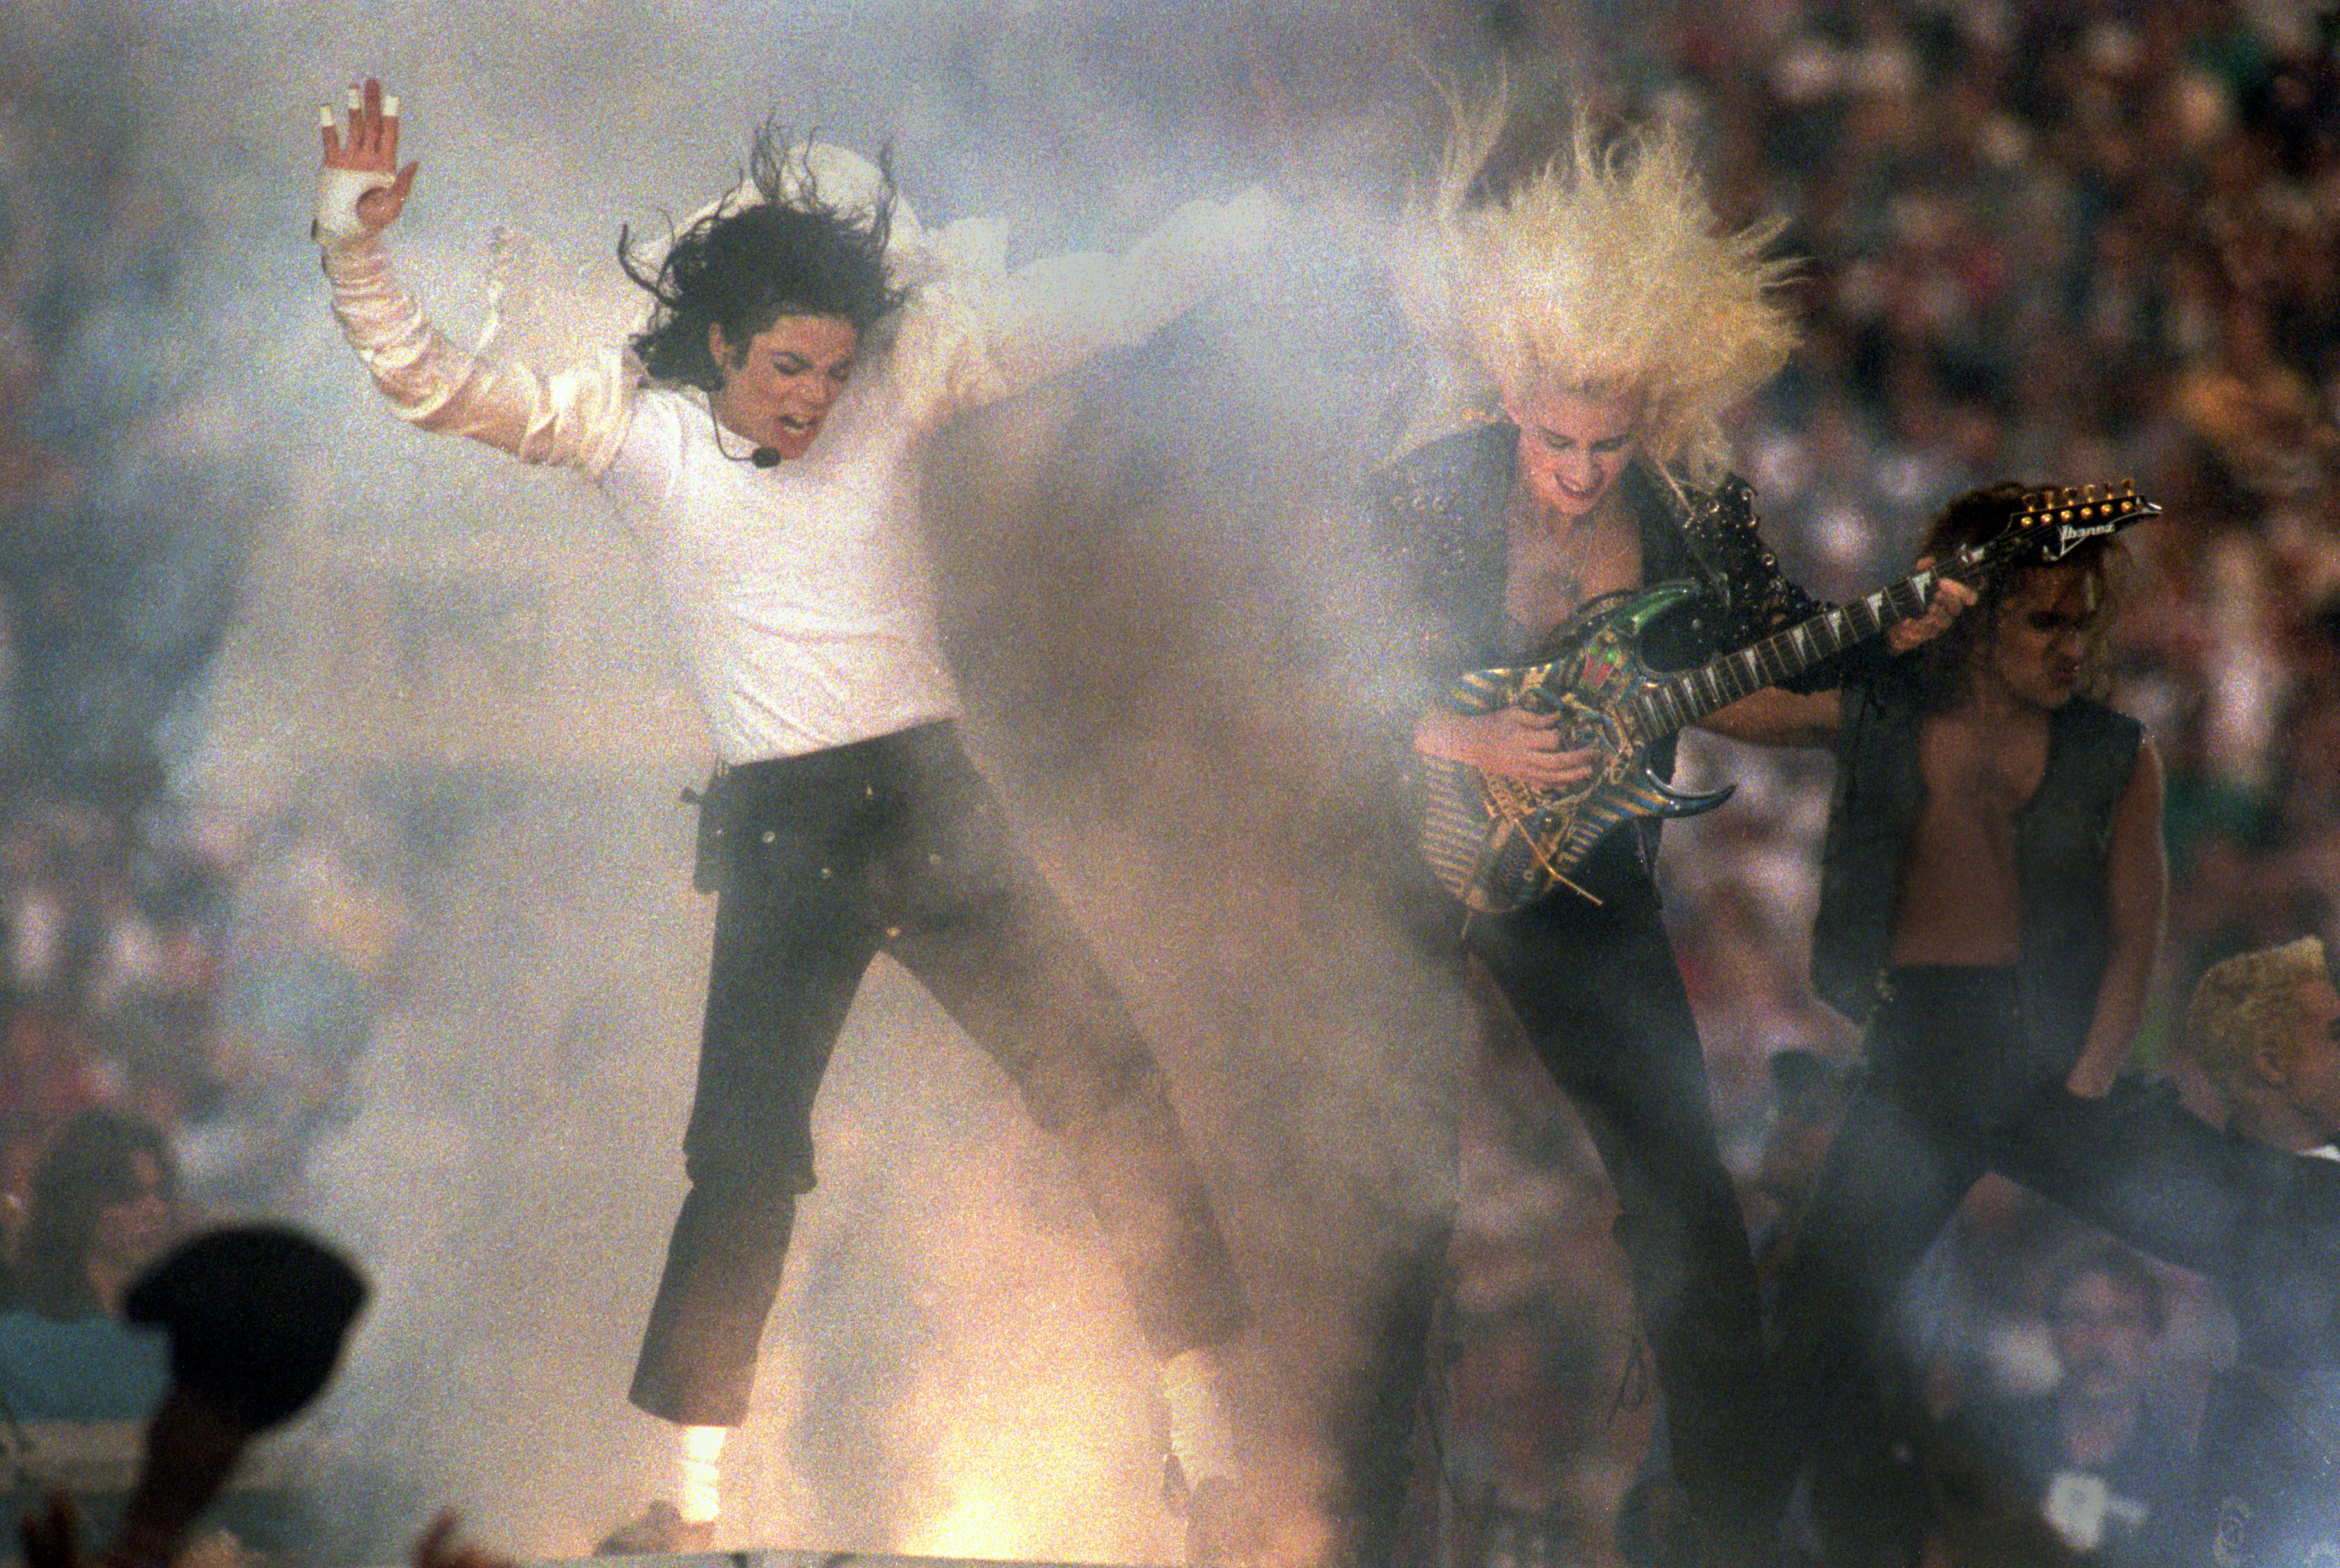 PASADENA, CA - JANUARY 31: Michael Jackson performs during the Halftime show as the Dallas Cowboys take on the Buffalo Bills in Super Bowl XXVII at Rose Bowl on January 31, 1993 in Pasadena, California.  The Cowboys won 52-17.  (Photo by George Rose / Getty Images)